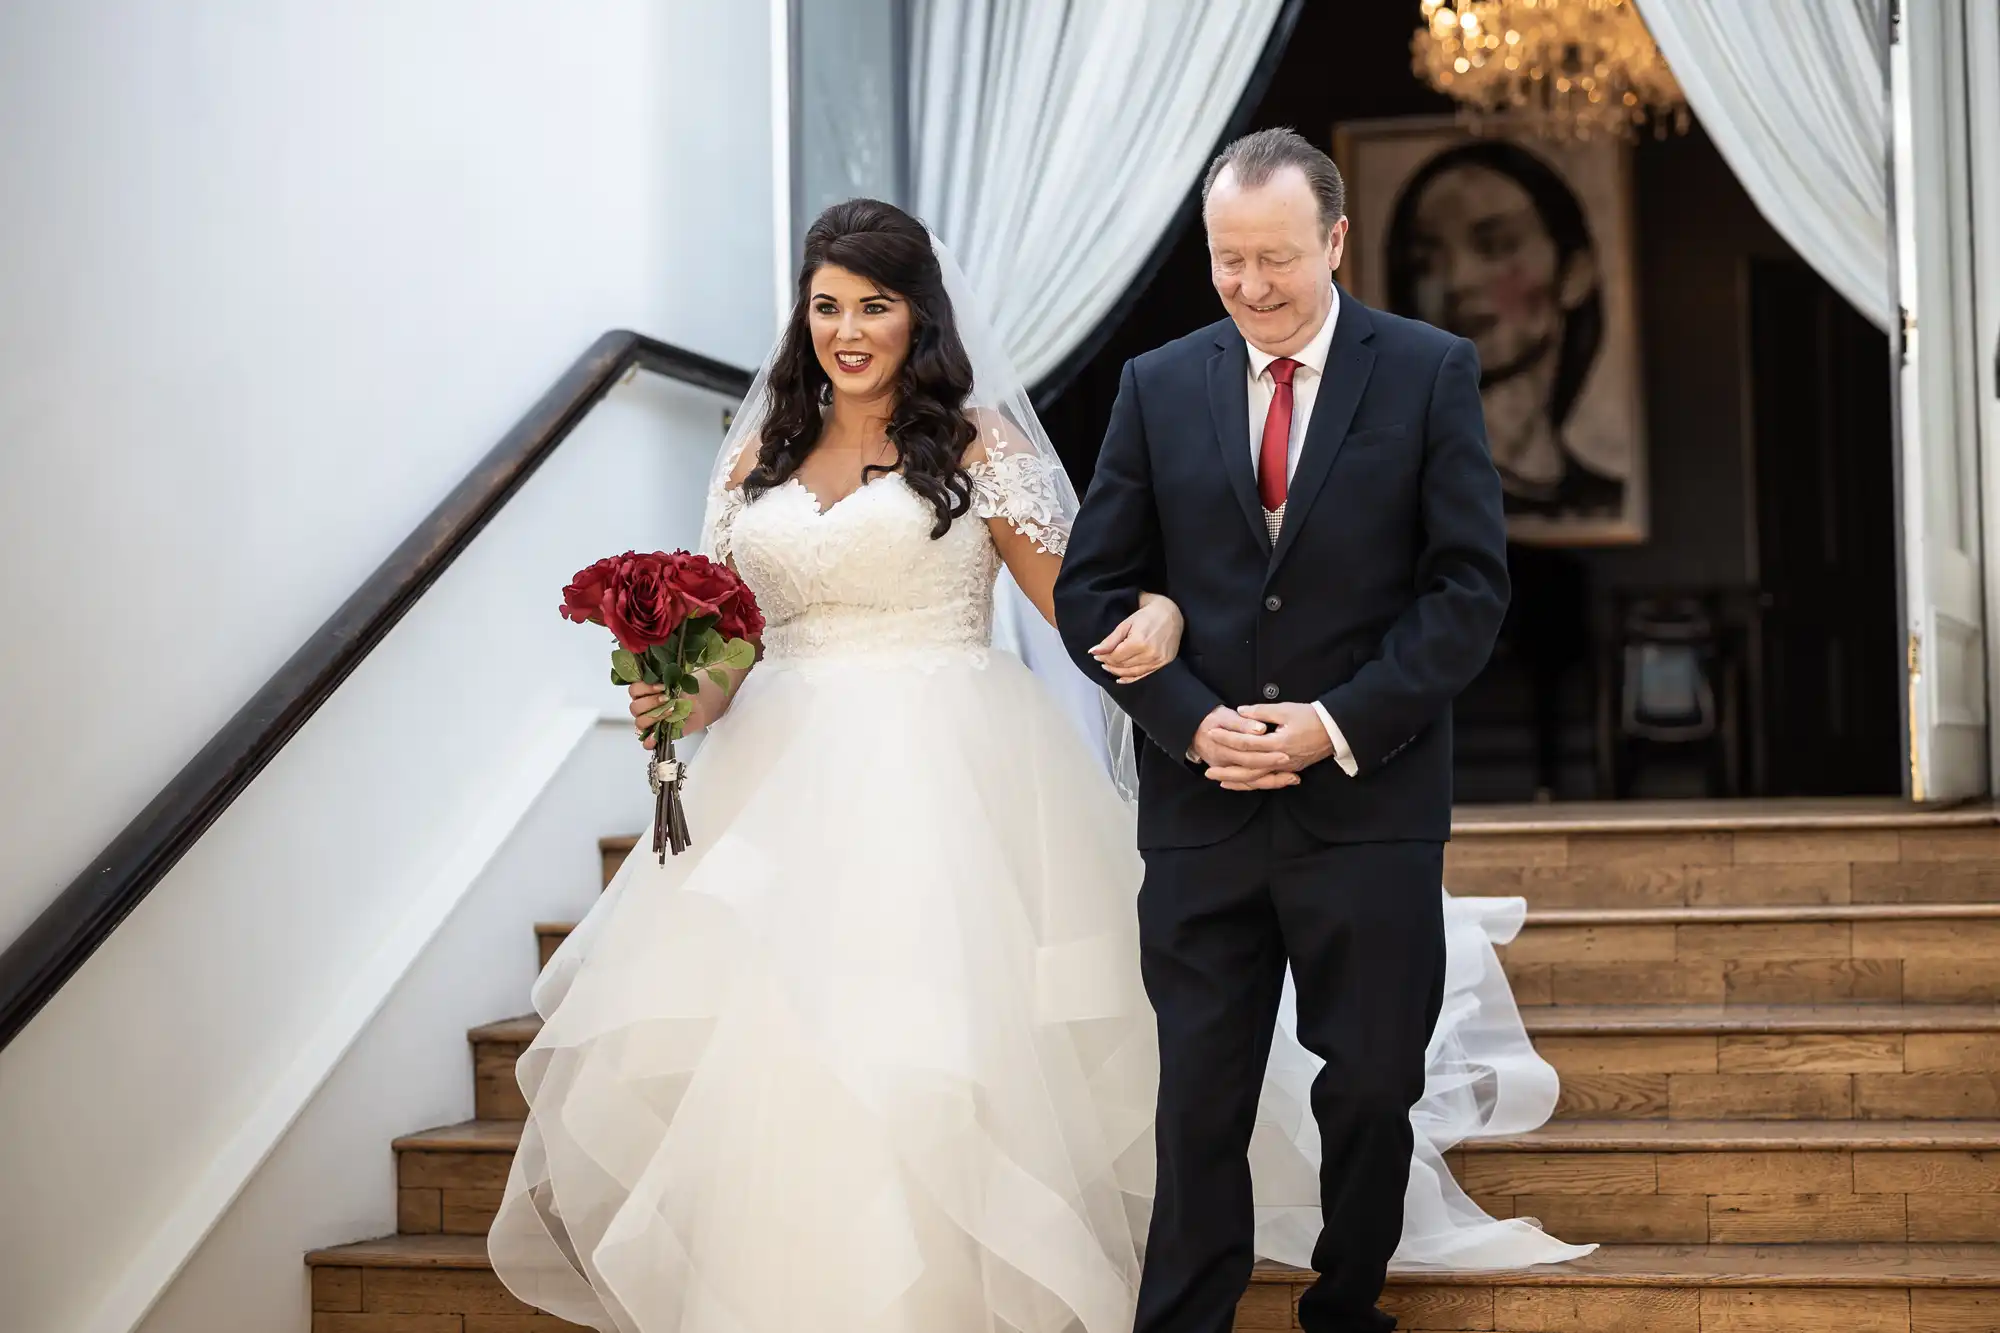 A bride in a white gown holding a bouquet of red roses walks down stairs arm-in-arm with a man in a dark suit and red tie.